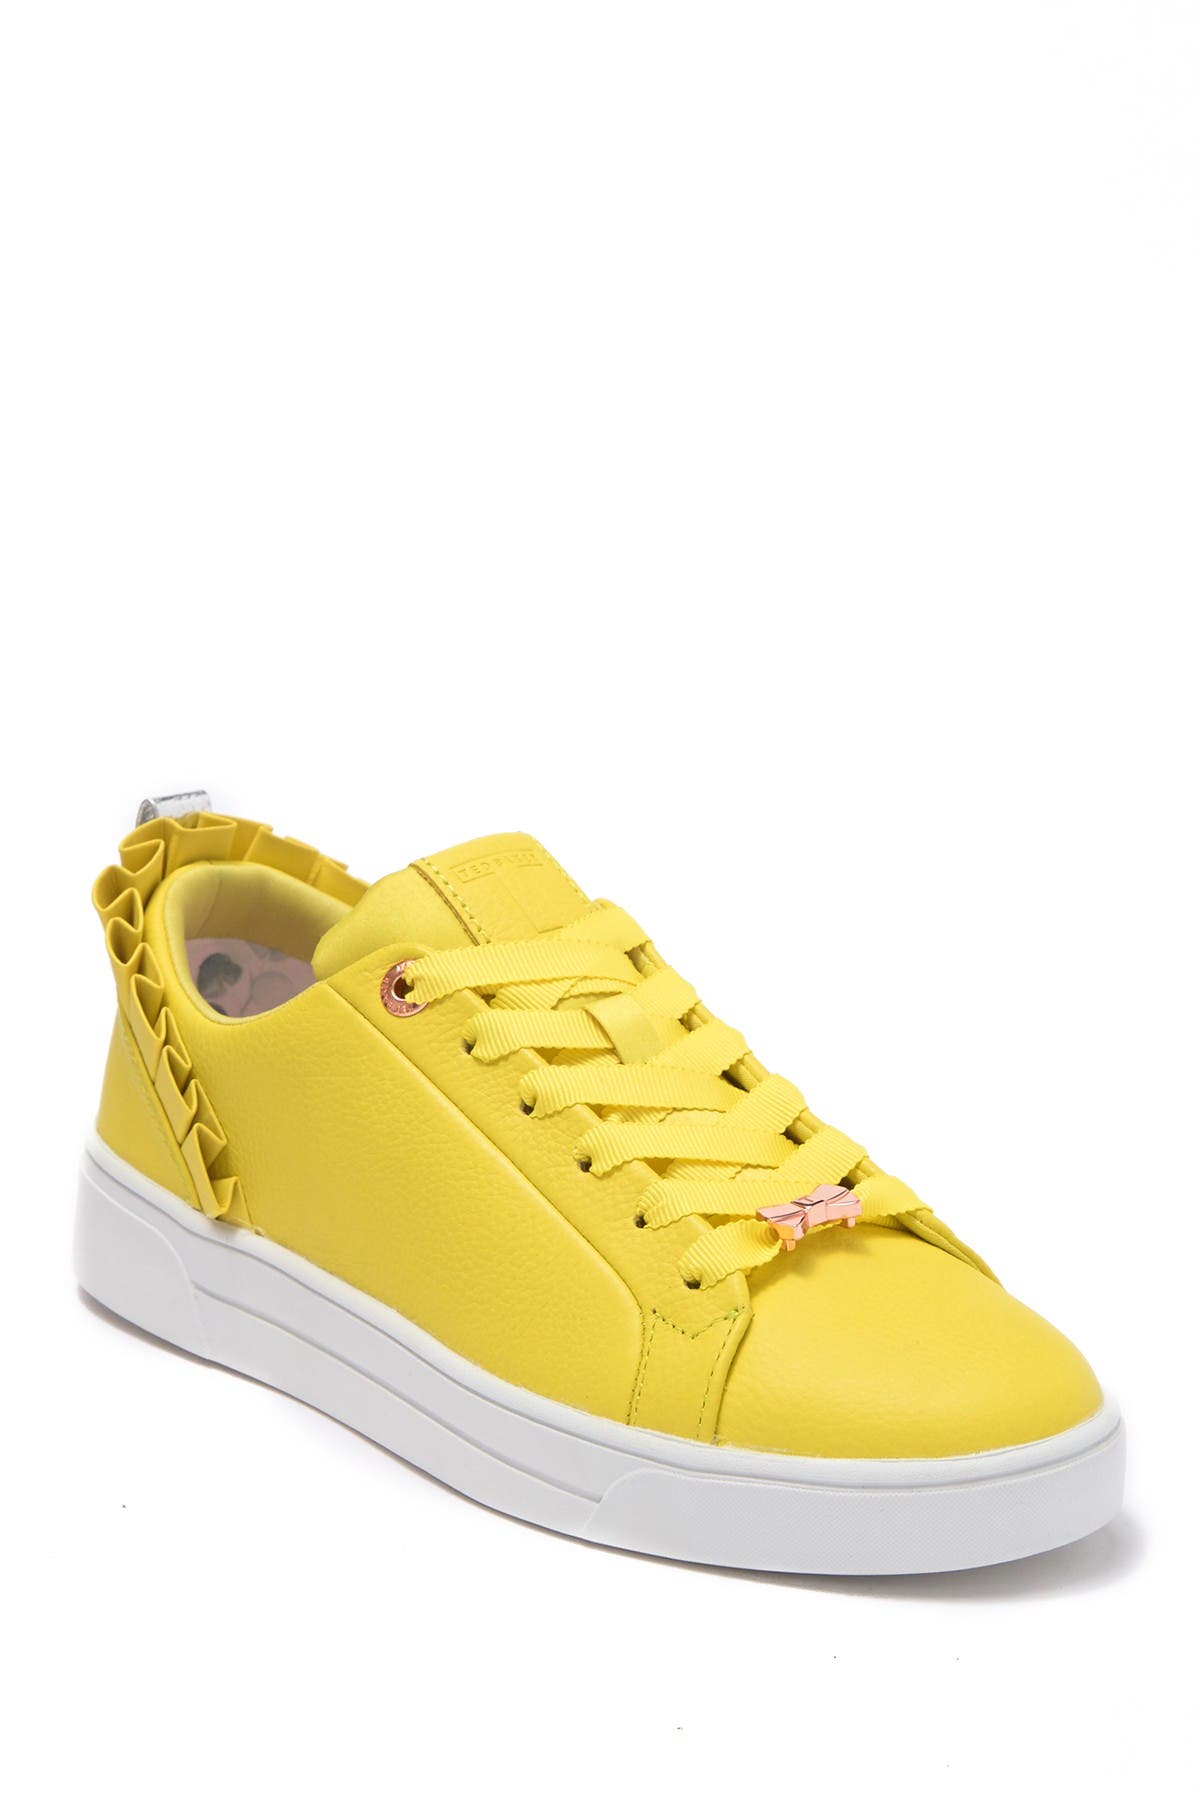 ted baker yellow trainers